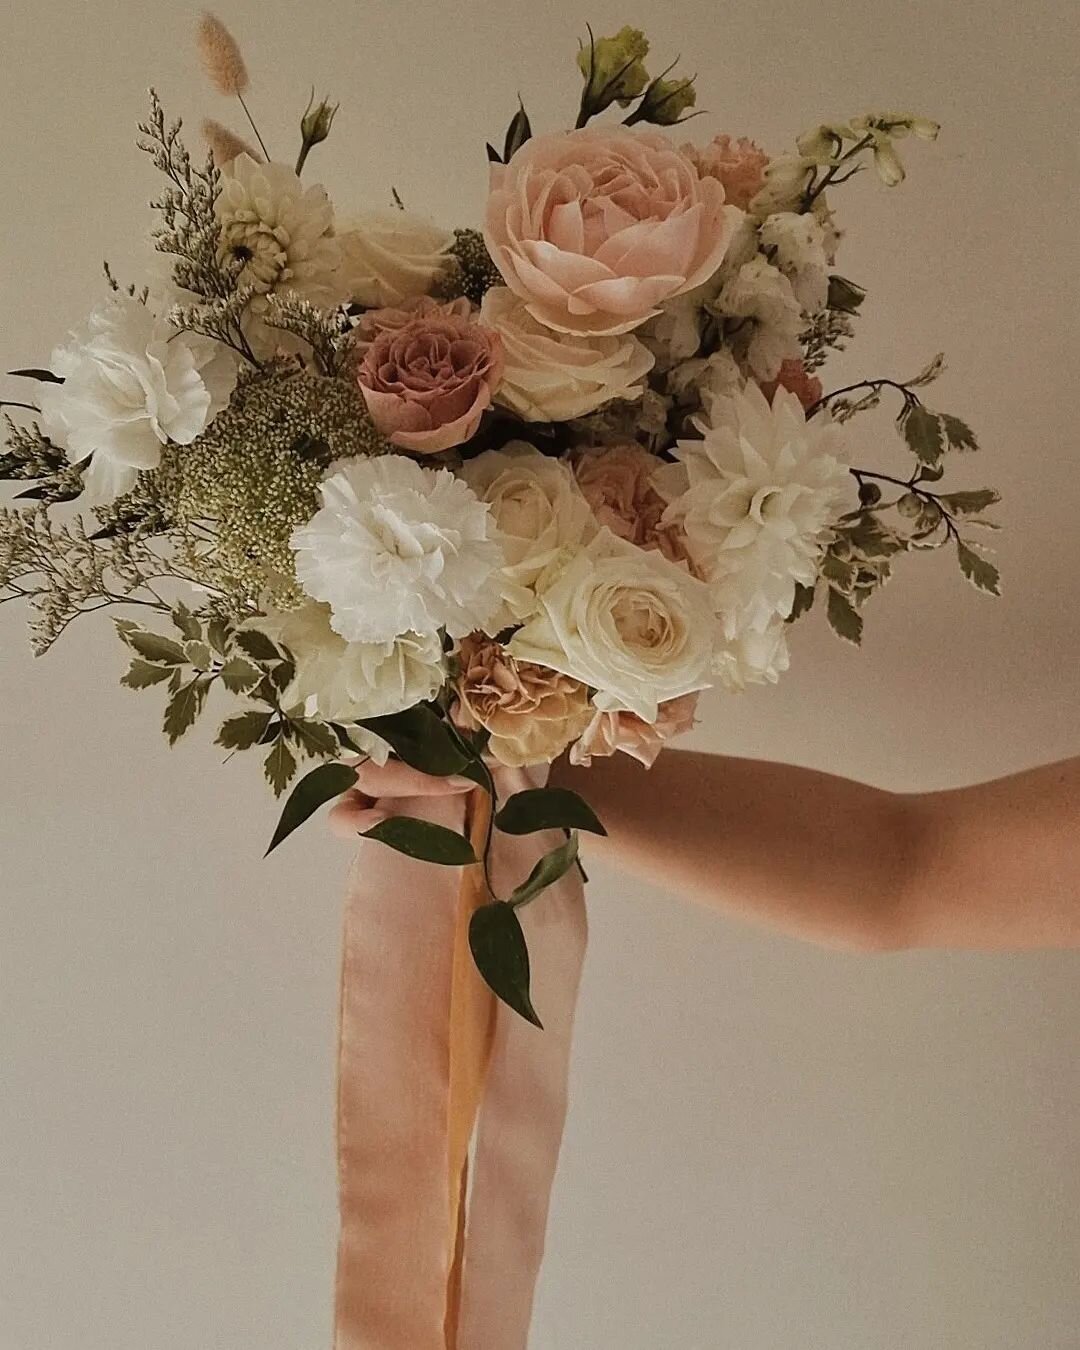 🍑 Indecisive choosing a colour palette for your wedding florals? 

🙋🏻&zwj;♀️

With all the designs you see on Pinterest and blogs, it can be super tricky (and sometimes overwhelming) to decide on one single idea. 

🤍 A few tips to make it easier: